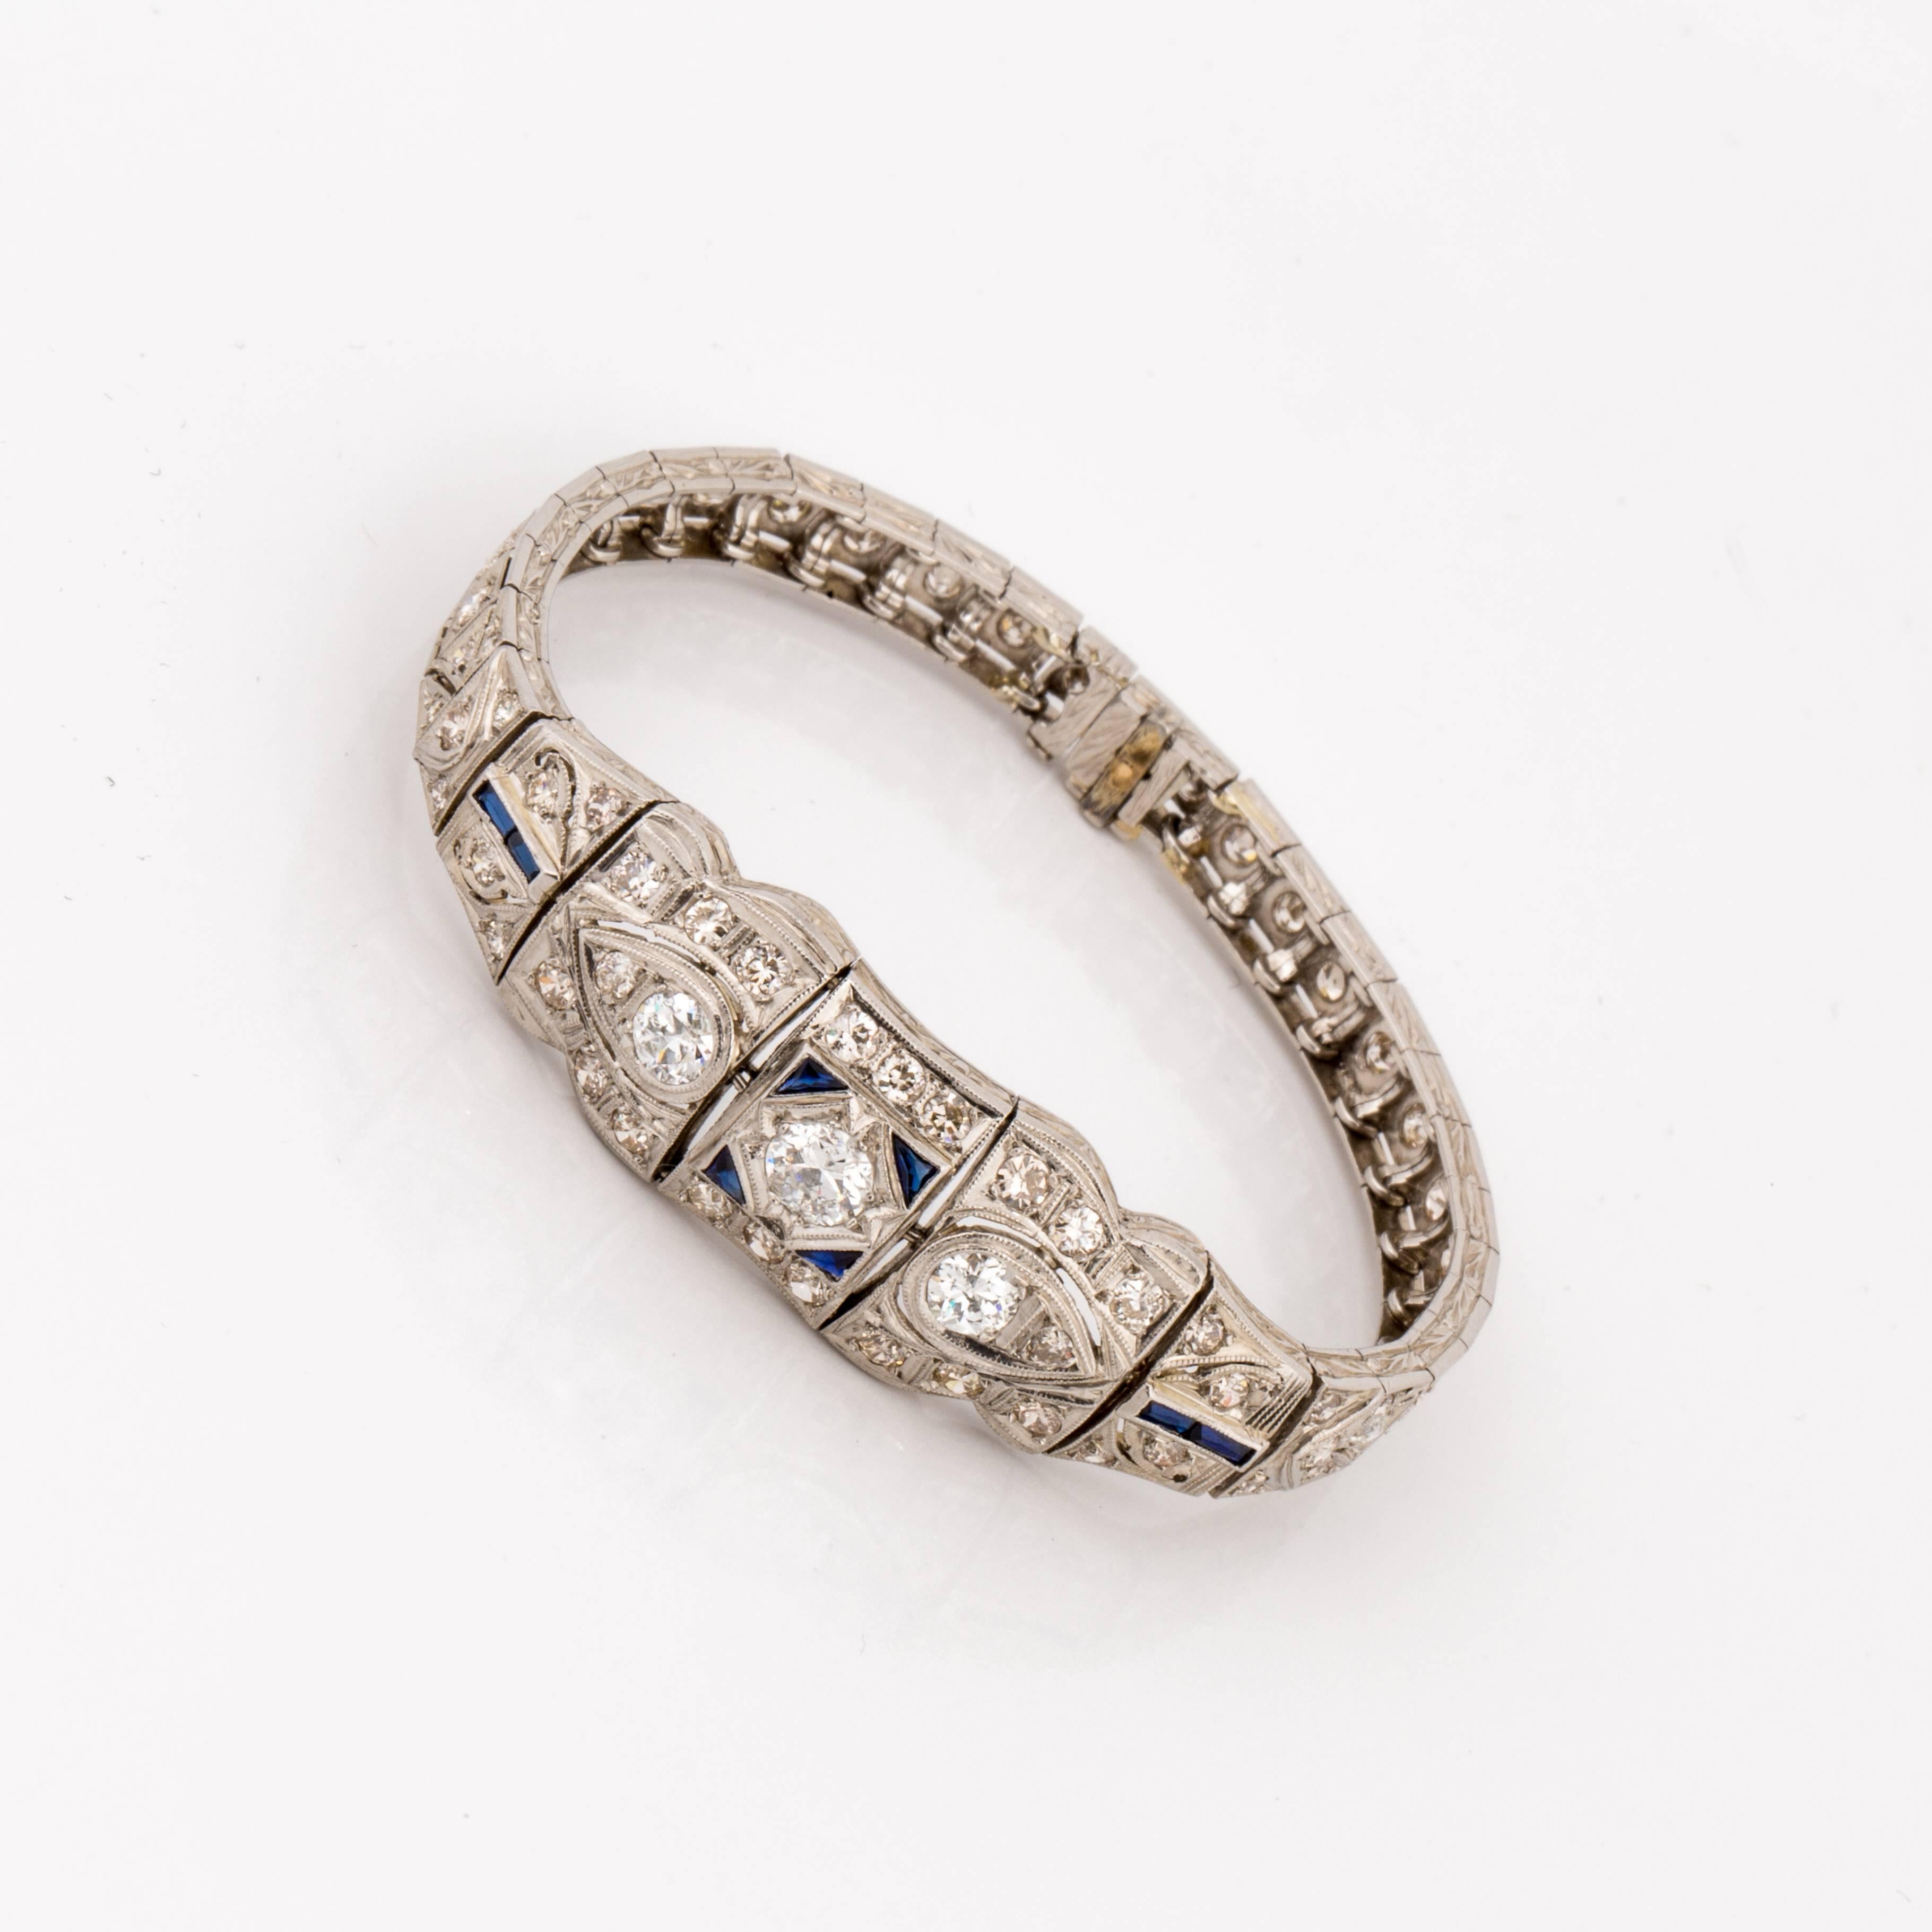 Art Deco openwork design bracelet in platinum with diamonds accented by synthetic sapphires.  There are a total of 65 diamonds that total 3.30 carats, J-L color and SI1-I1 clarity.  It measures 6 1/8 inches long and 1/2 inch wide.  Circa 1930.